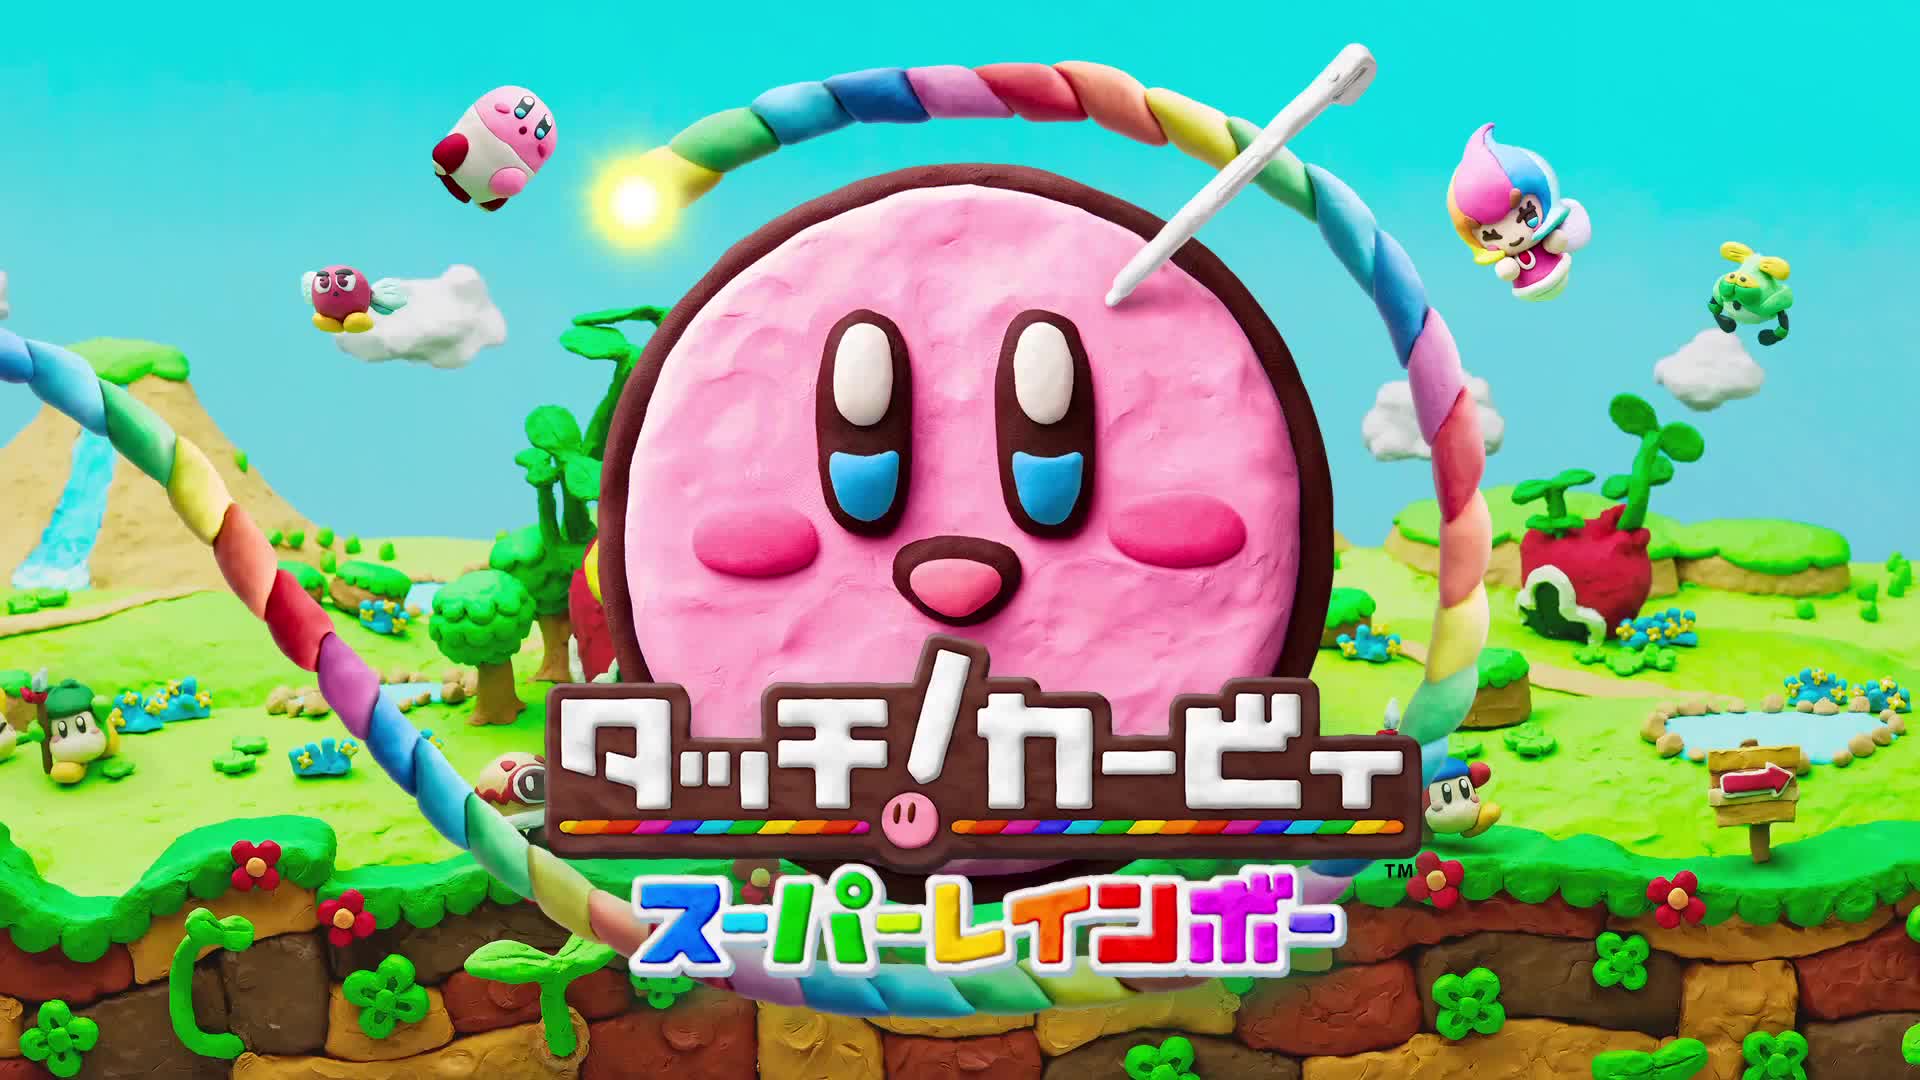 Kirby and the Rainbow Curse Overview Trailer